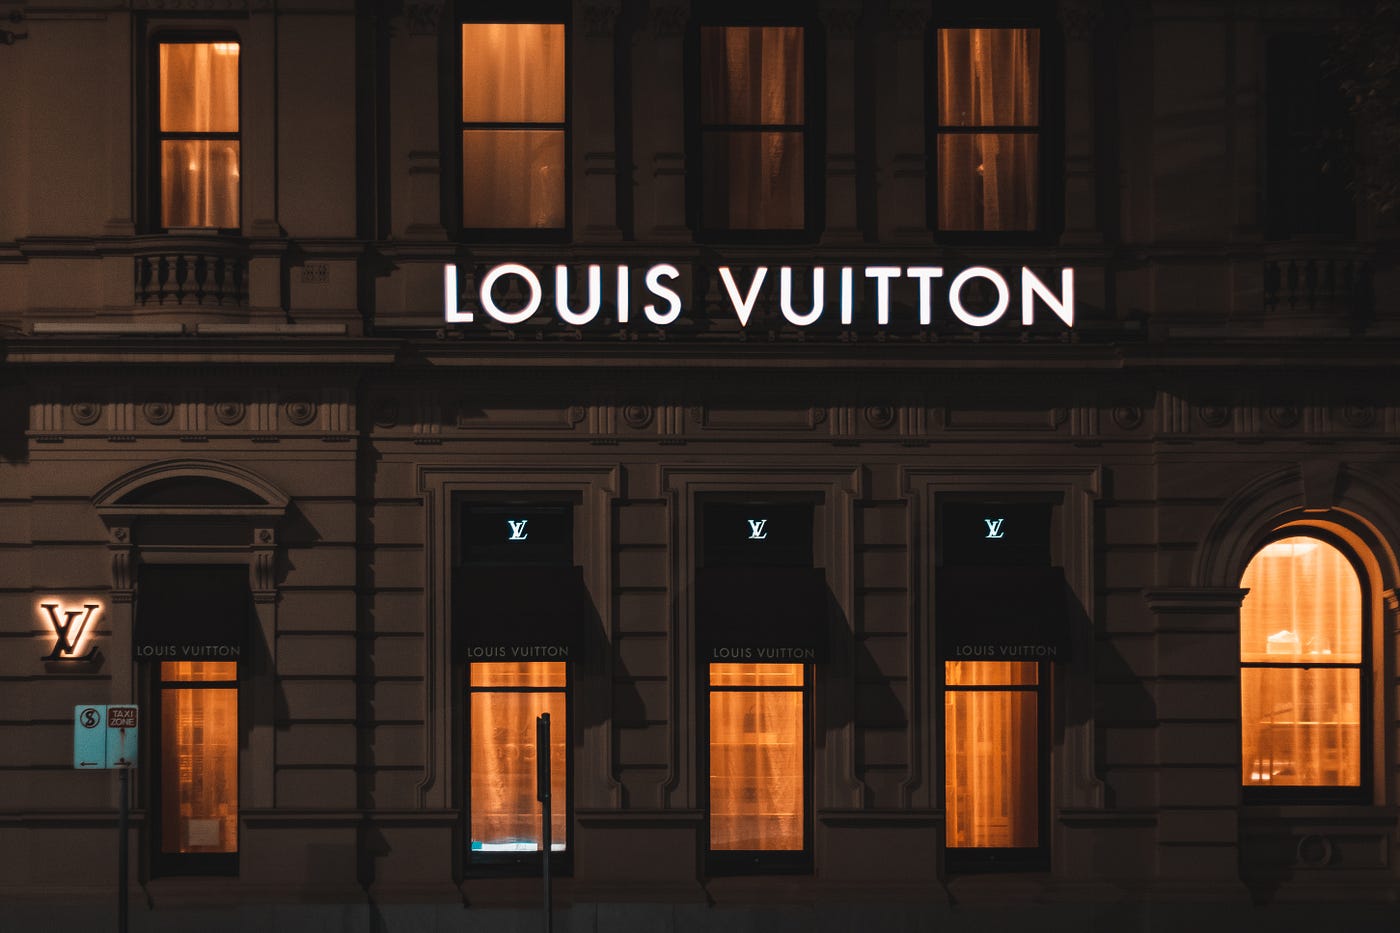 Competitive Stategies of LVMH